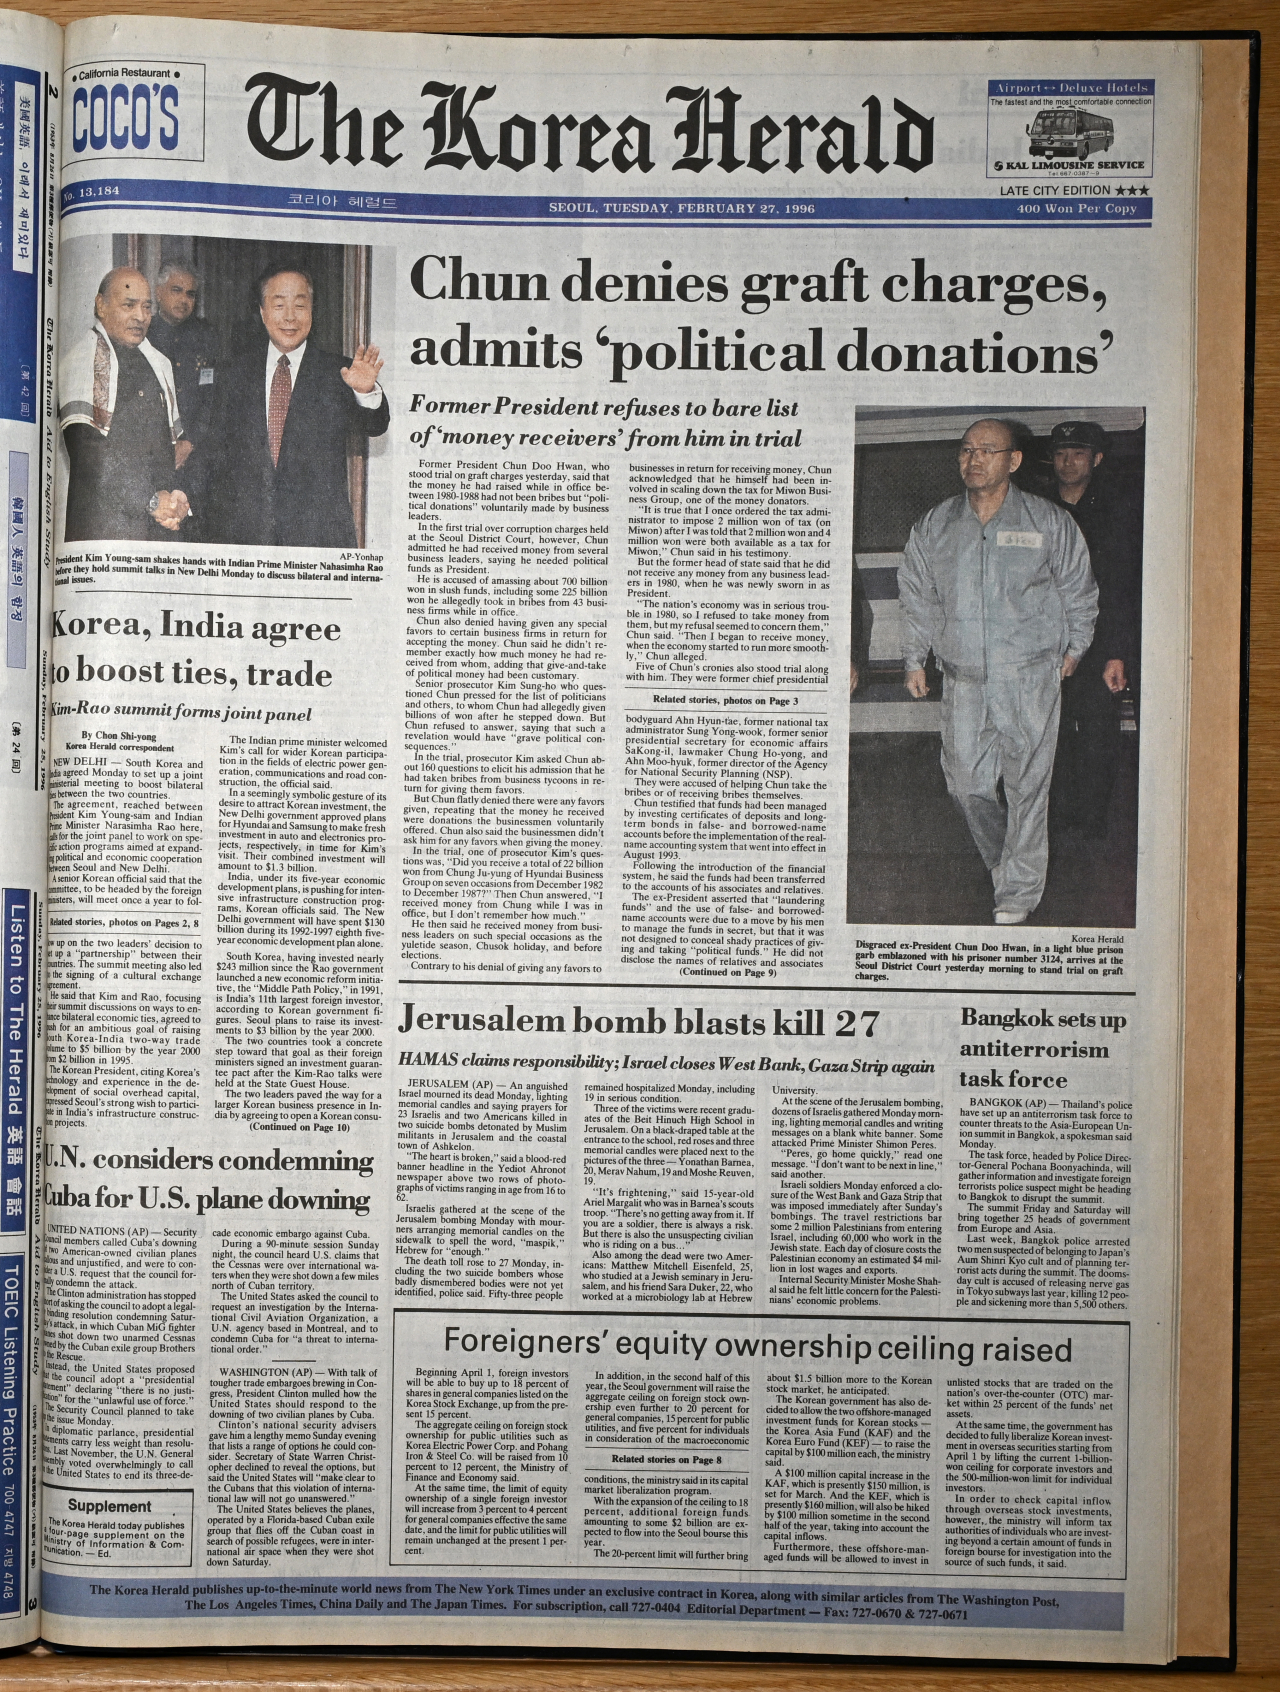 The Feb. 27, 1996 edition of The Korea Herald carries a top story and a photo regarding former President Chun Doo-hwan‘s trial. (The Korea Herald DB)